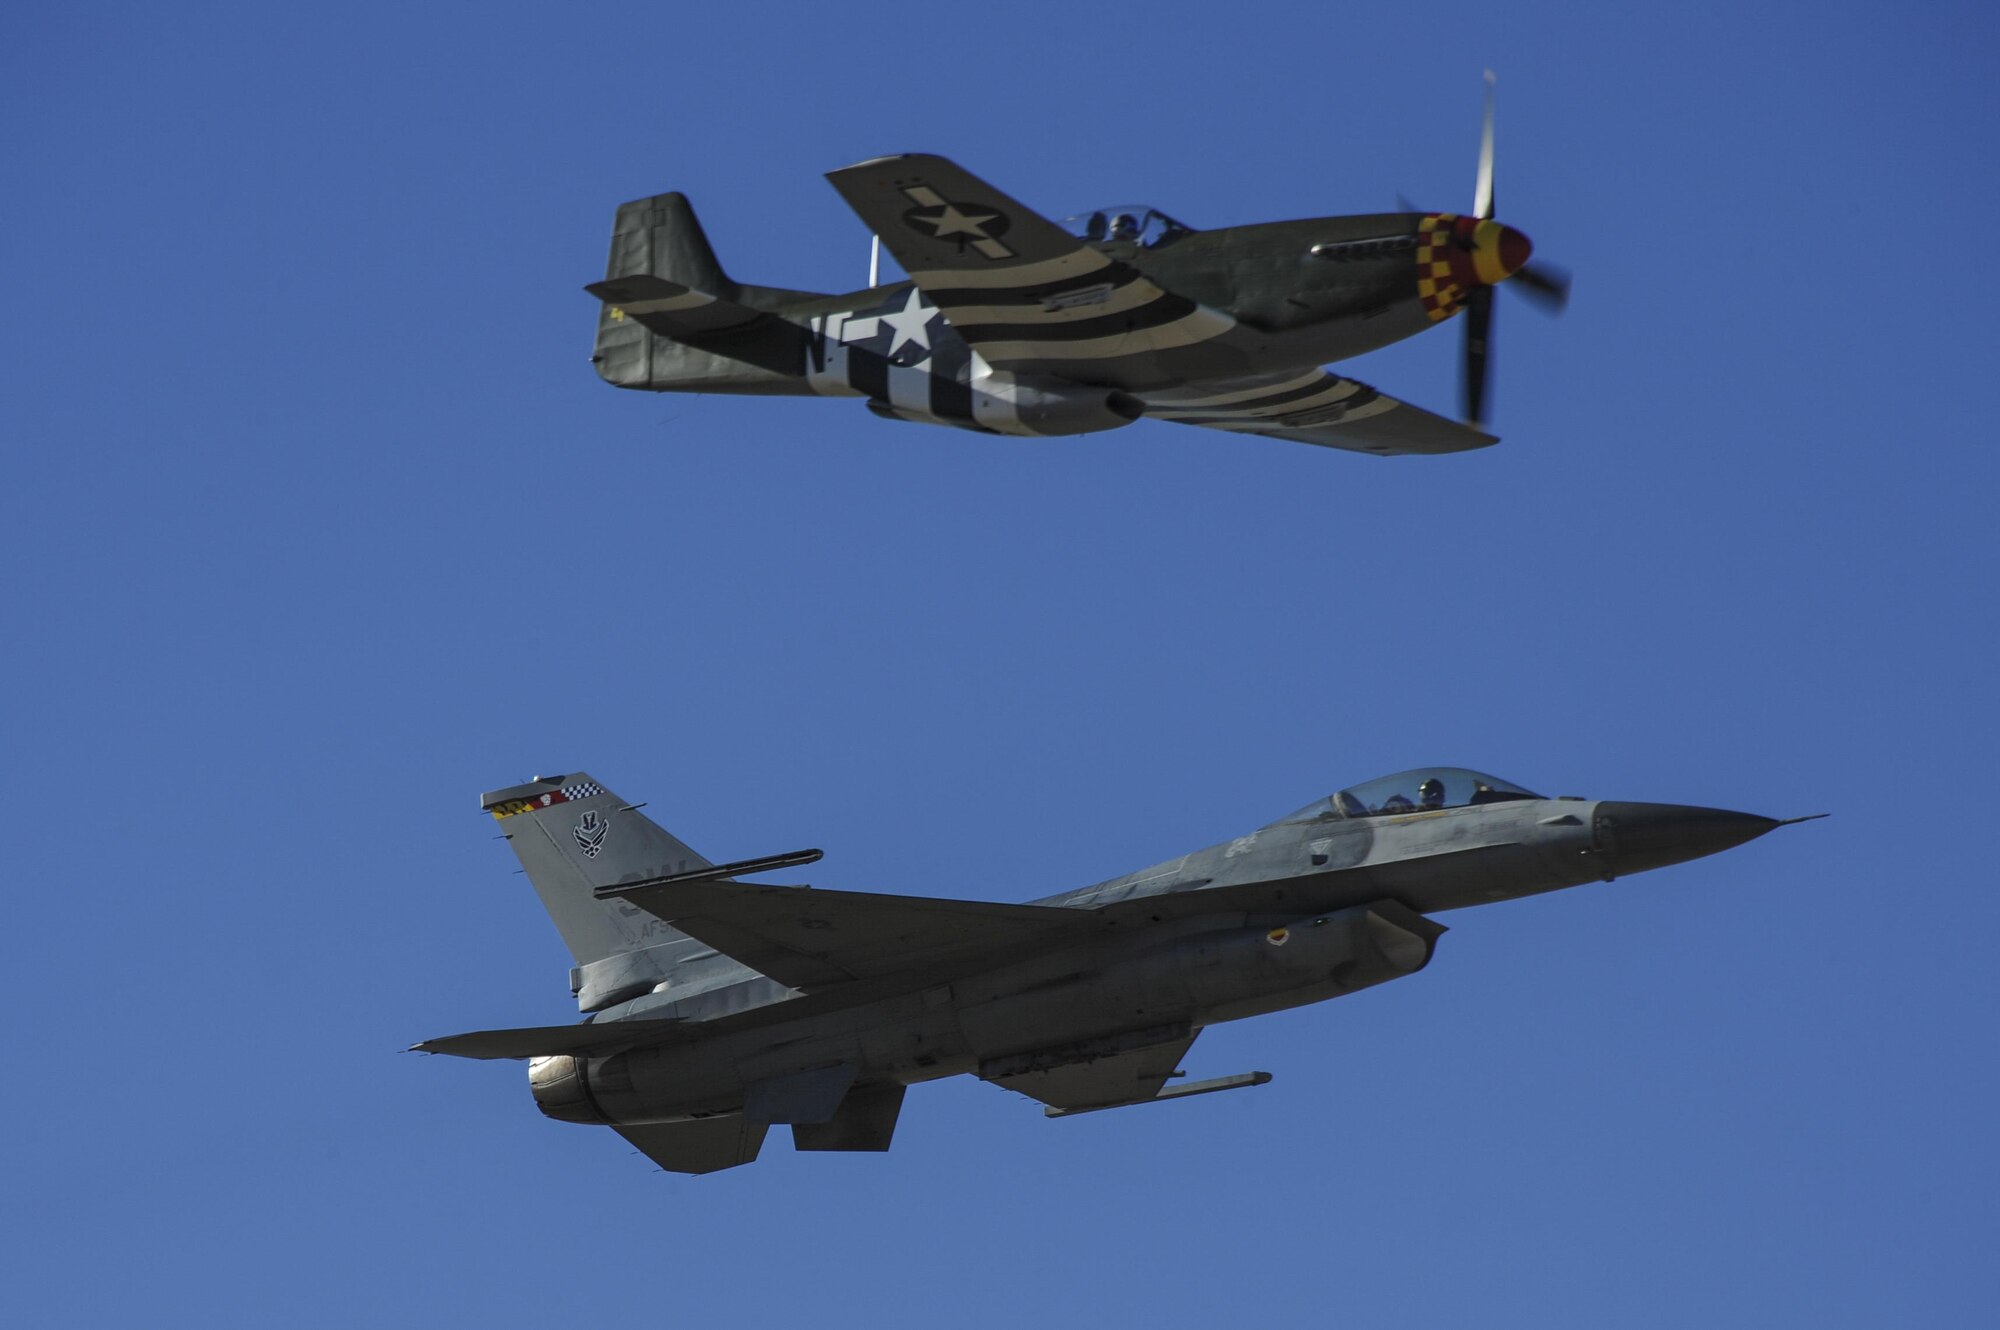 A U.S. Air Force F-16C Fighting Falcon and a P-51 Mustang fly in formation during the 2017 Heritage Flight Training and Certification Course at Davis-Monthan Air Force Base, Ariz., Feb. 10, 2017. The course provides civilian and military pilots the opportunity to practice flying in formation together in preparation for future air shows. (U.S. Air Force photo by Airman 1st Class Mya M. Crosby)